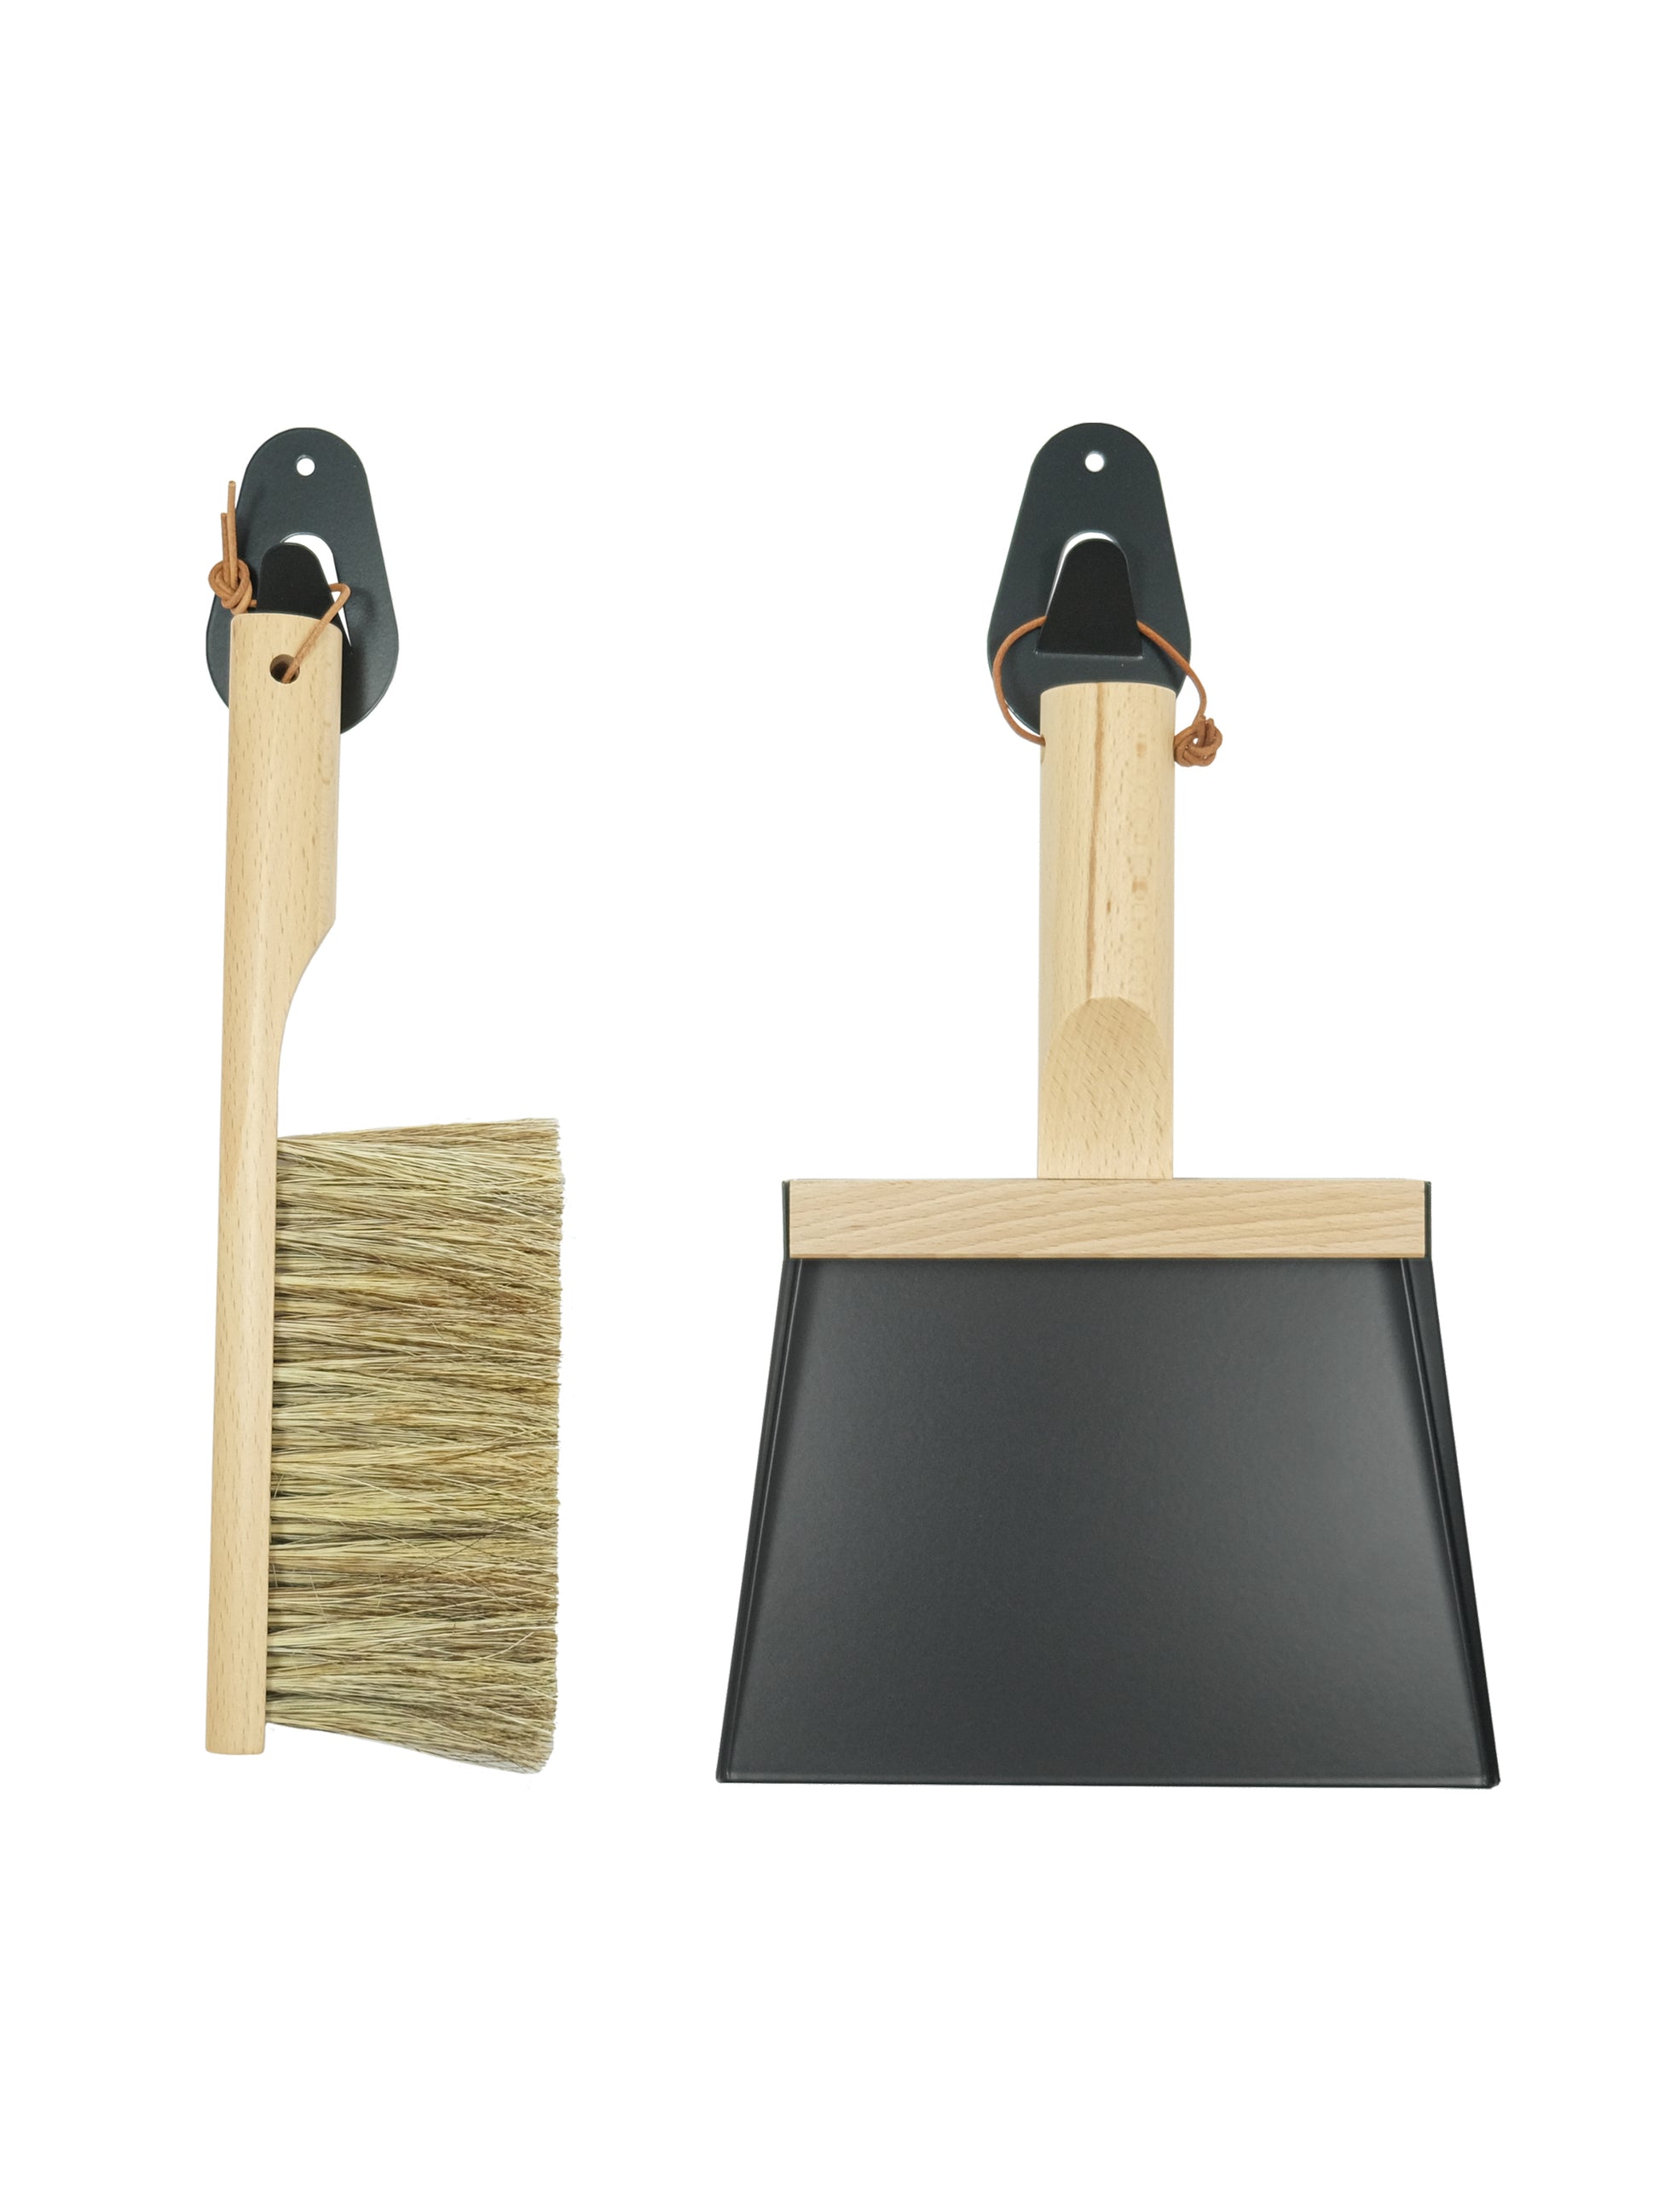 Andrée Jardin Mr. and Mrs. Clynk Hand Brush, Dustpan and  Wall Hook Set Black Weston Table